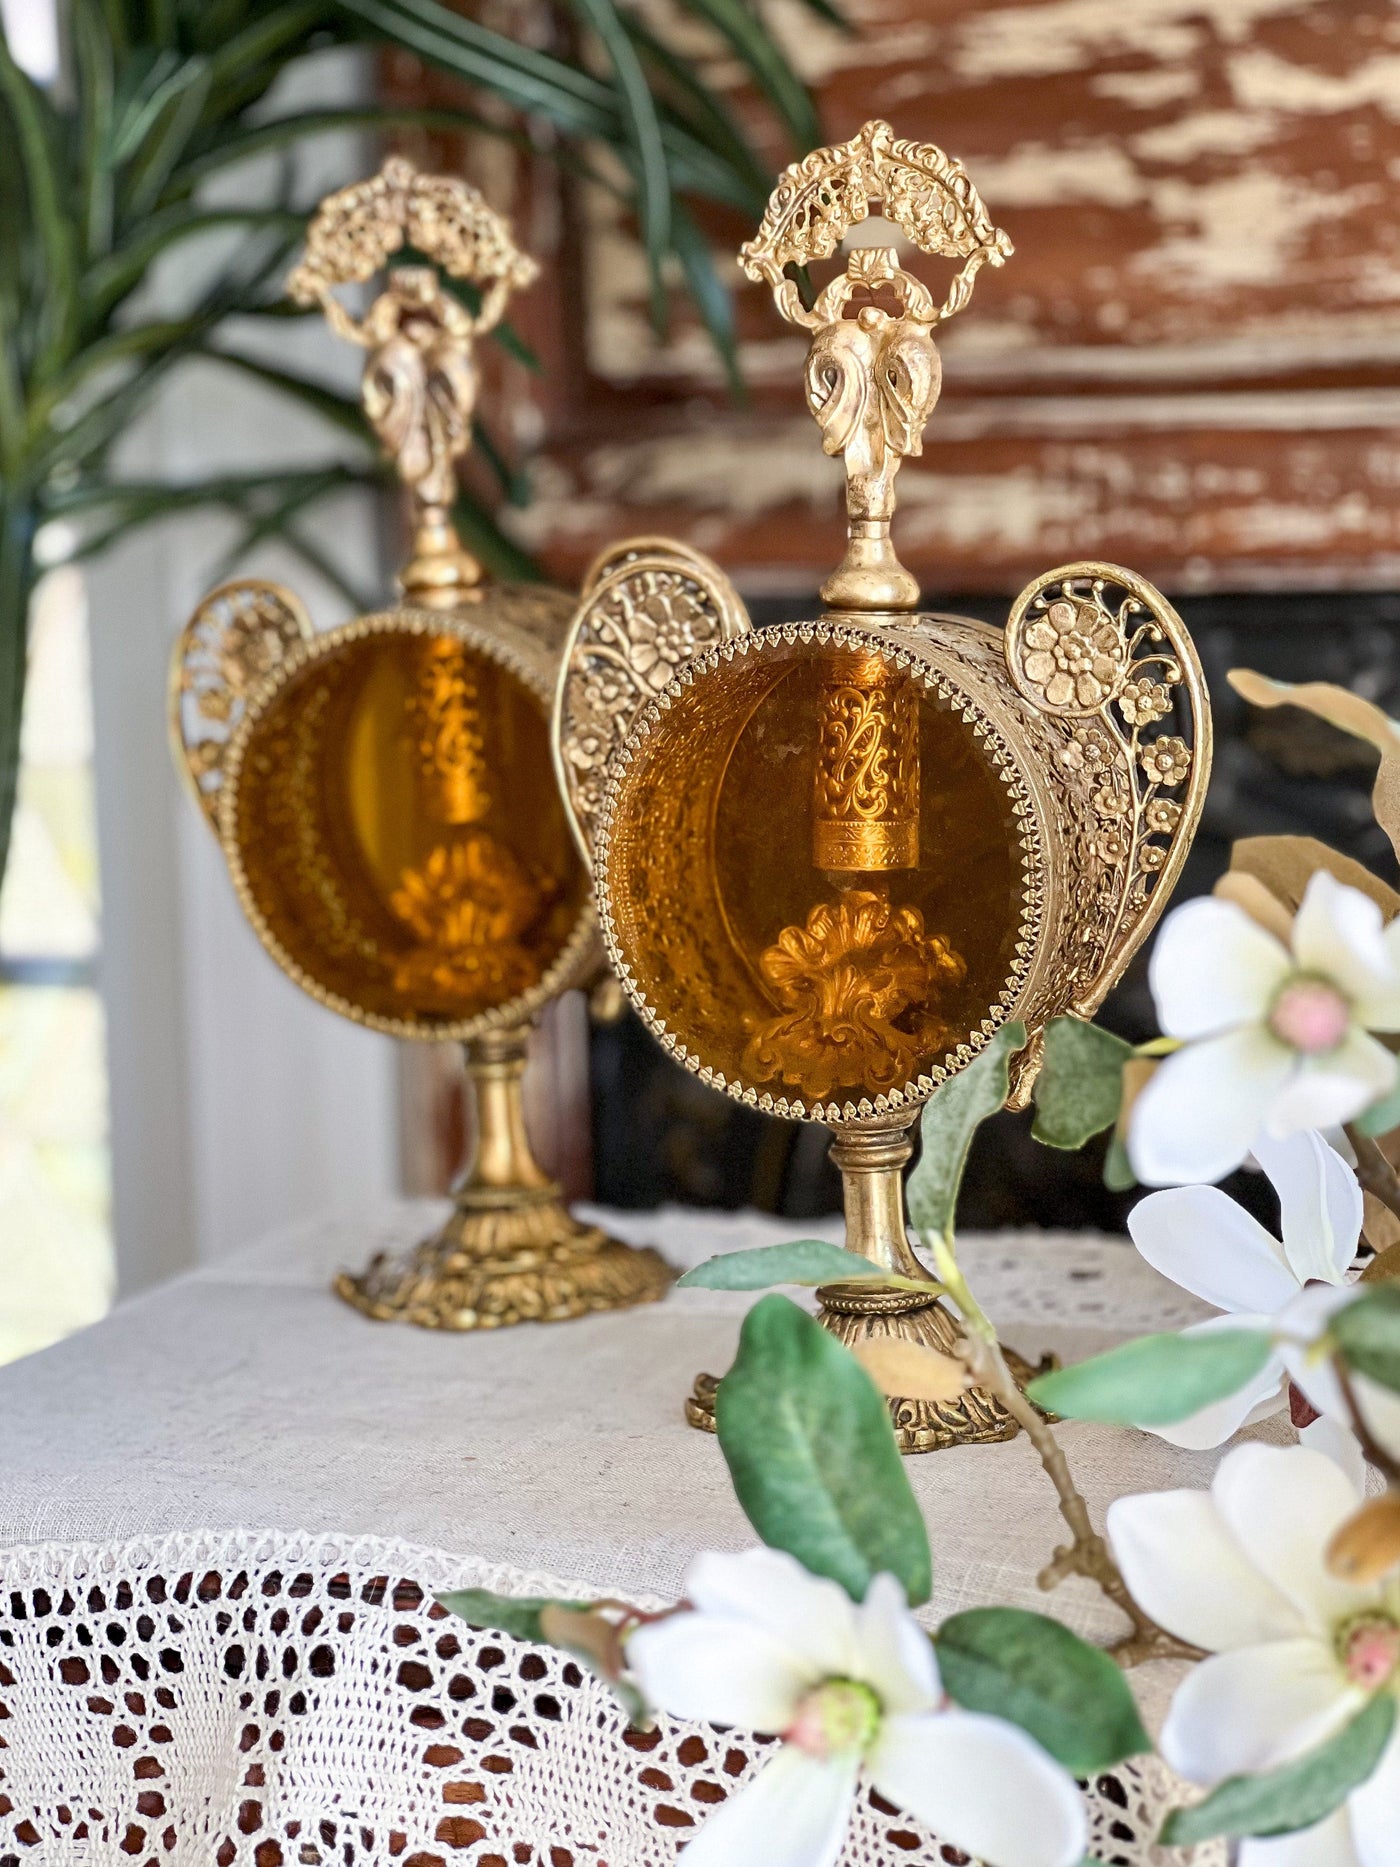 HOLLYWOOD REGENCY ORNATE GOLD ORMOLU PERFUME BOTTLES - SET OF 2 Revive In Style Vintage Furniture Painted Refinished Redesign Beautiful One of a Kind Artistic Antique Unique Home Decor Interior Design French Country Shabby Chic Cottage Farmhouse Grandmillenial Coastal Chalk Paint Metallic Glam Eclectic Quality Dovetailed Rustic Furniture Painter Pinterest Bedroom Living Room Entryway Kitchen Home Trends House Styles Decorating ideas